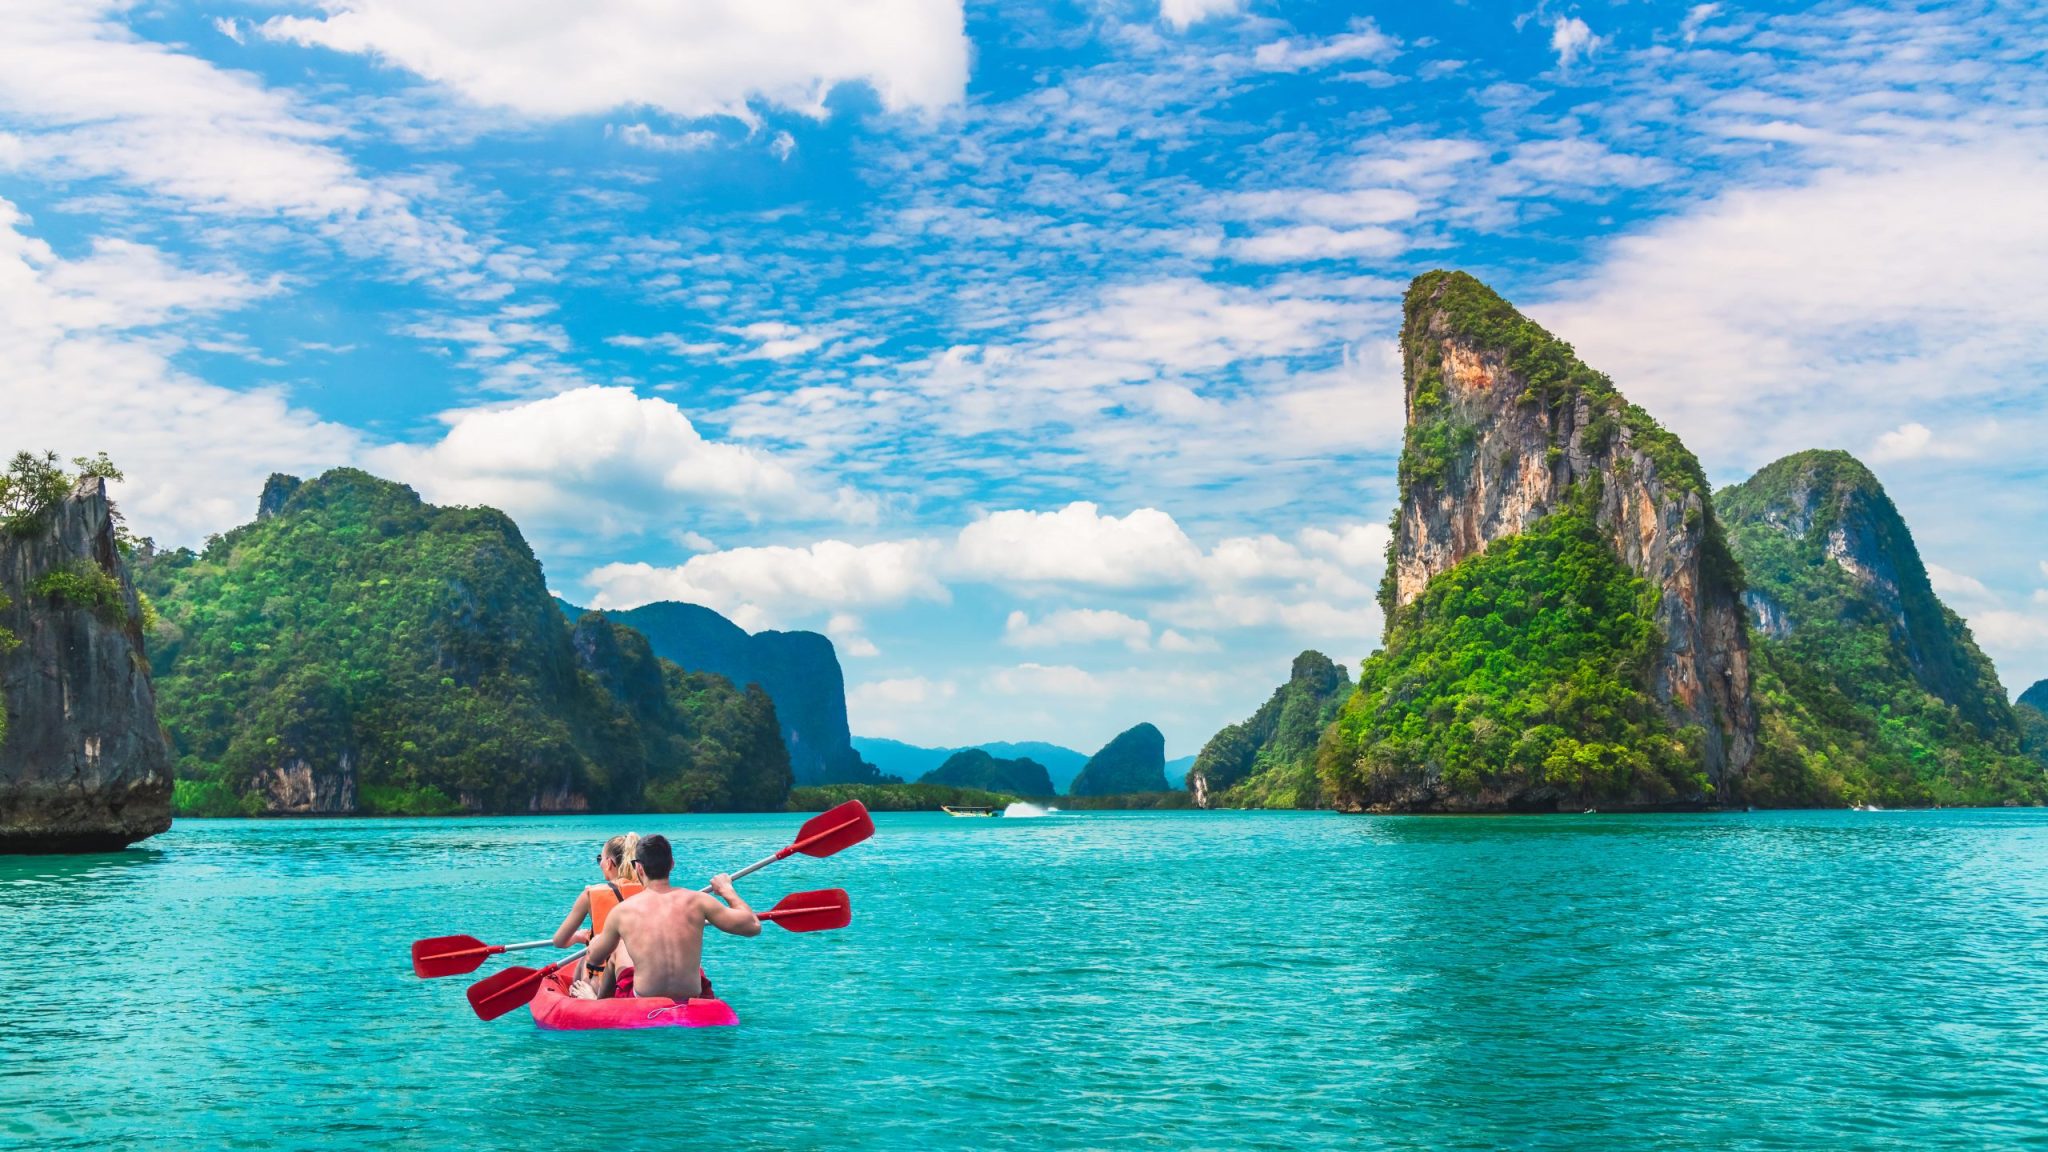 A spa massage in Phuket can ease tired and sore muscles after a day of kayaking around the islands.